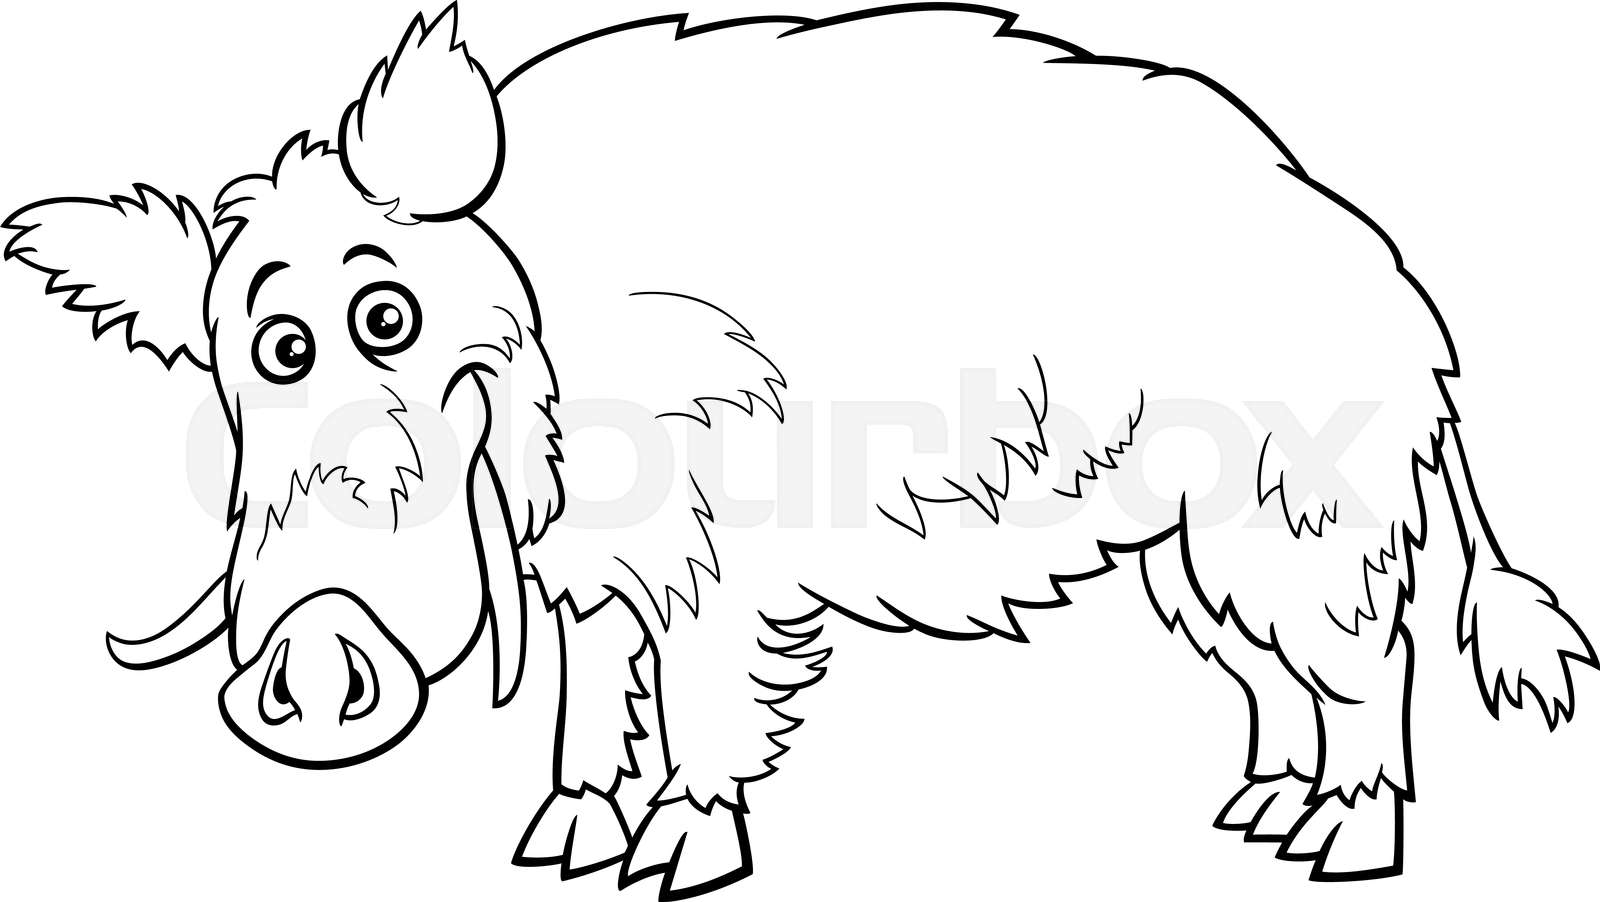 cartoon wild boar funny animal character coloring page | Stock vector |  Colourbox